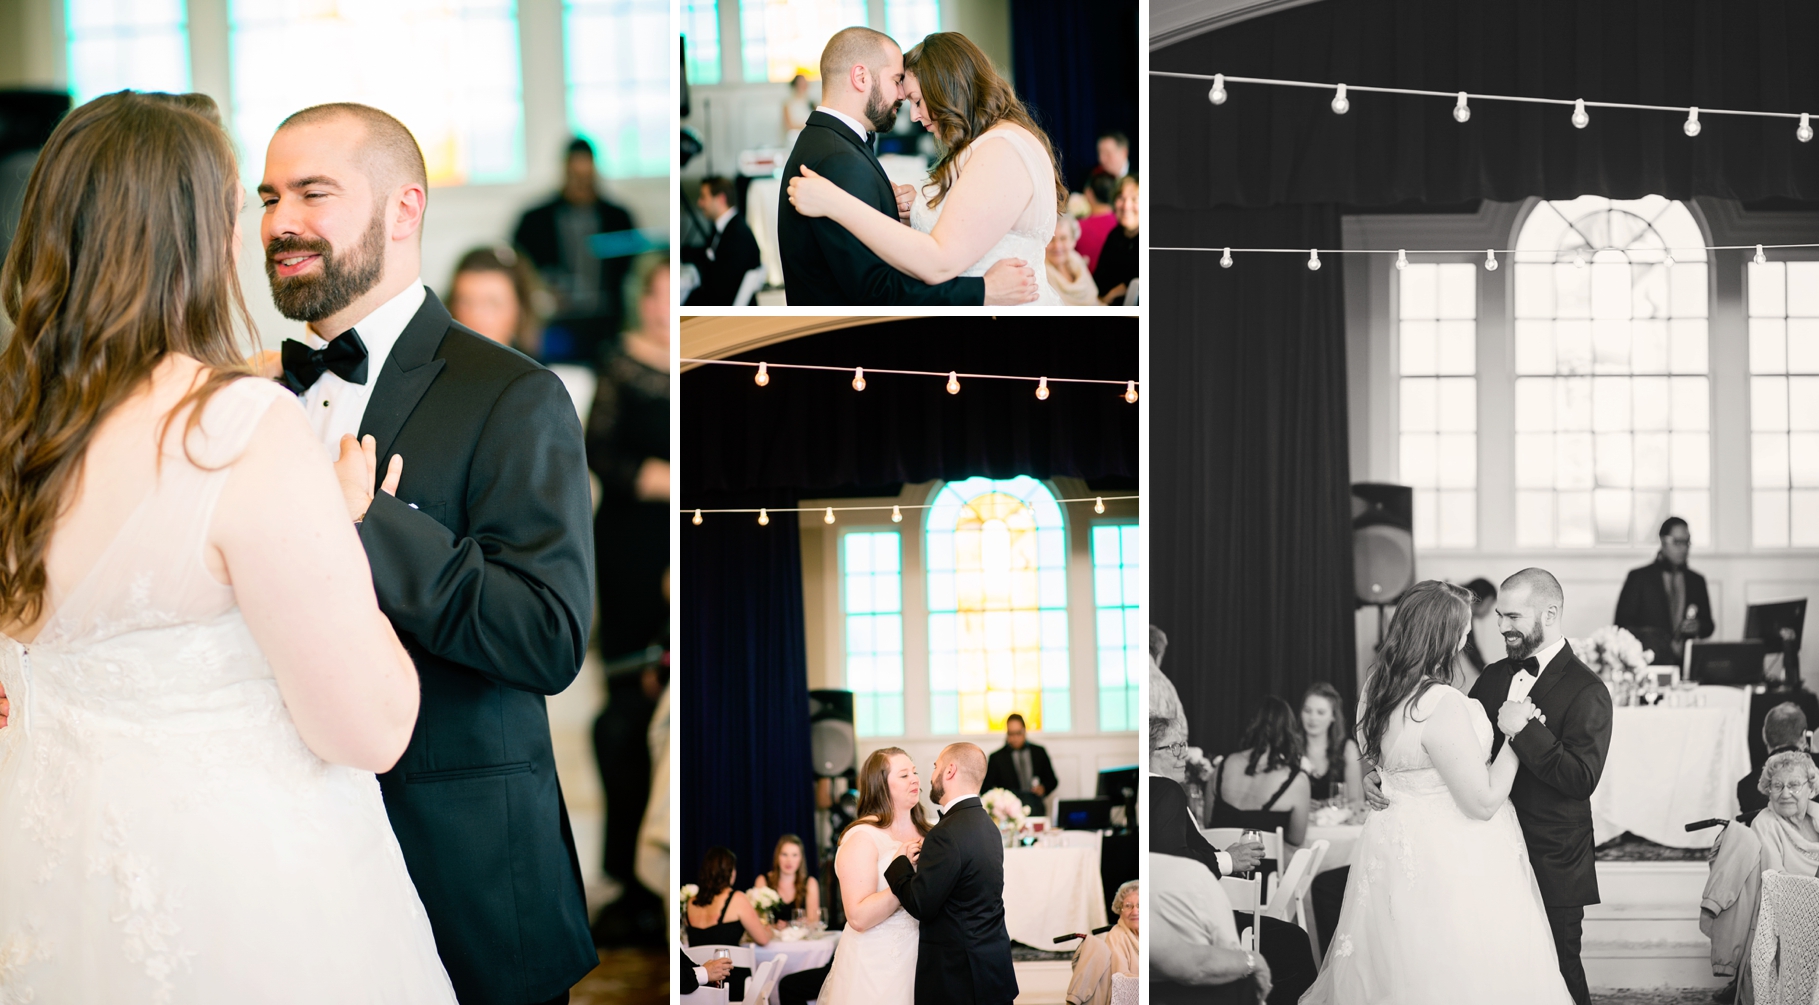 55-Great-Hall-Green-Lake-Wedding-Reception-First-Dance-Bride-Groom-Venue-Details-Ballroom-Classic-Style-Seattle-Wedding-Photographer-Photography-by-Betty-Elaine